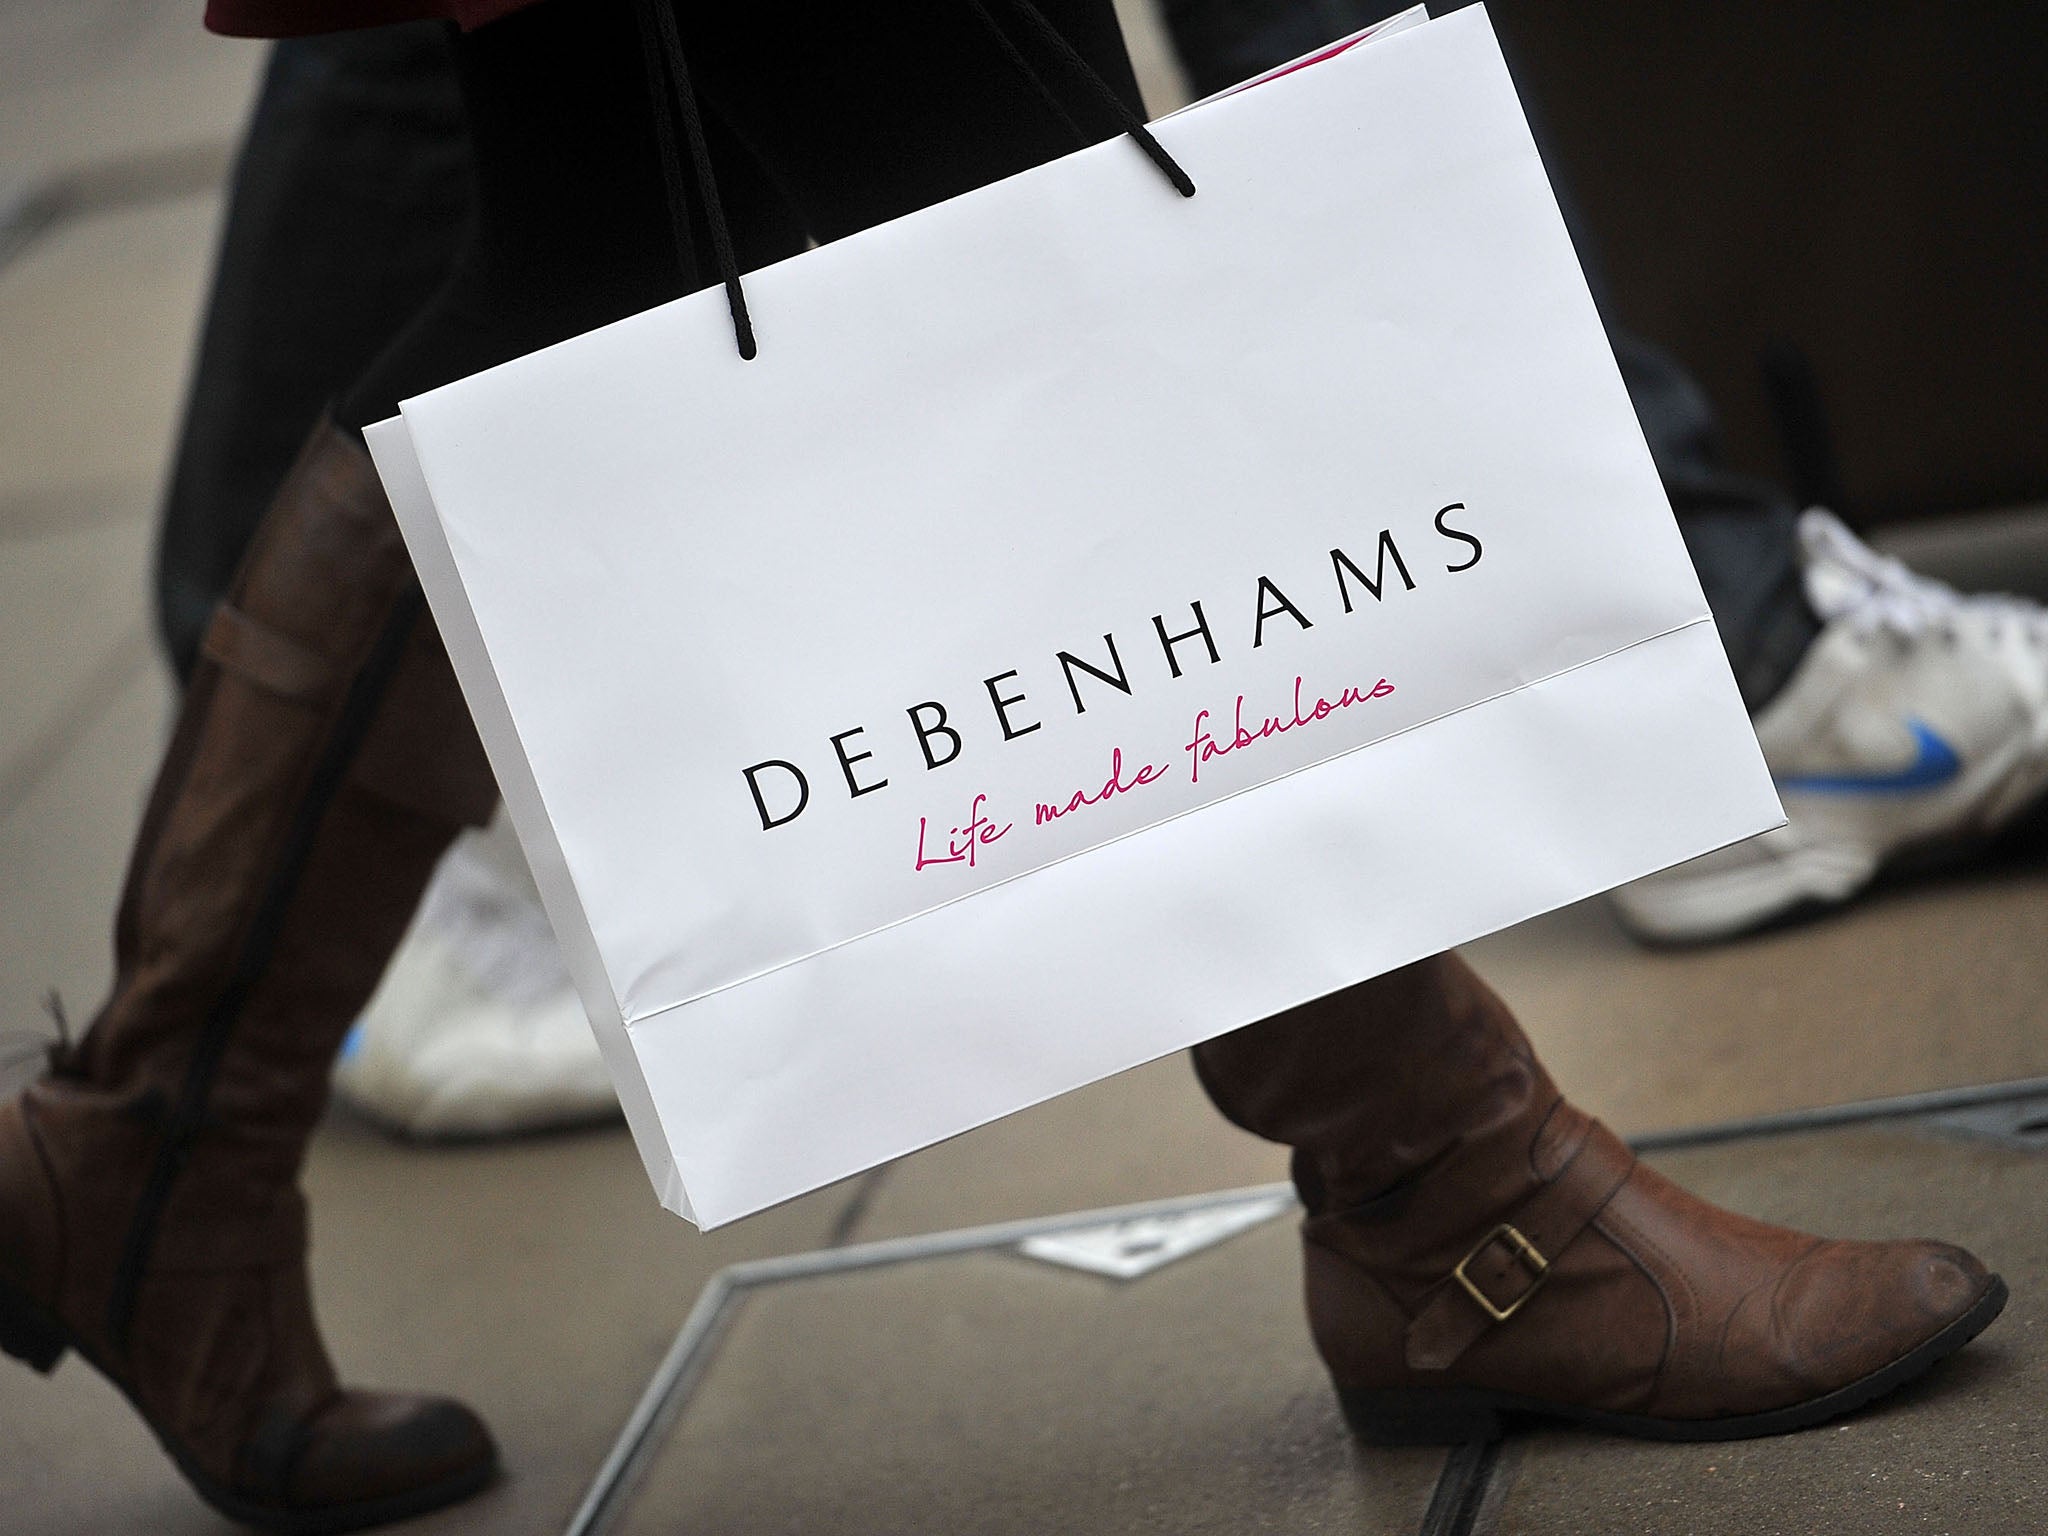 High street retailer Debenhams was accused of failing to pay almost £135,000 to just under 12,000 workers